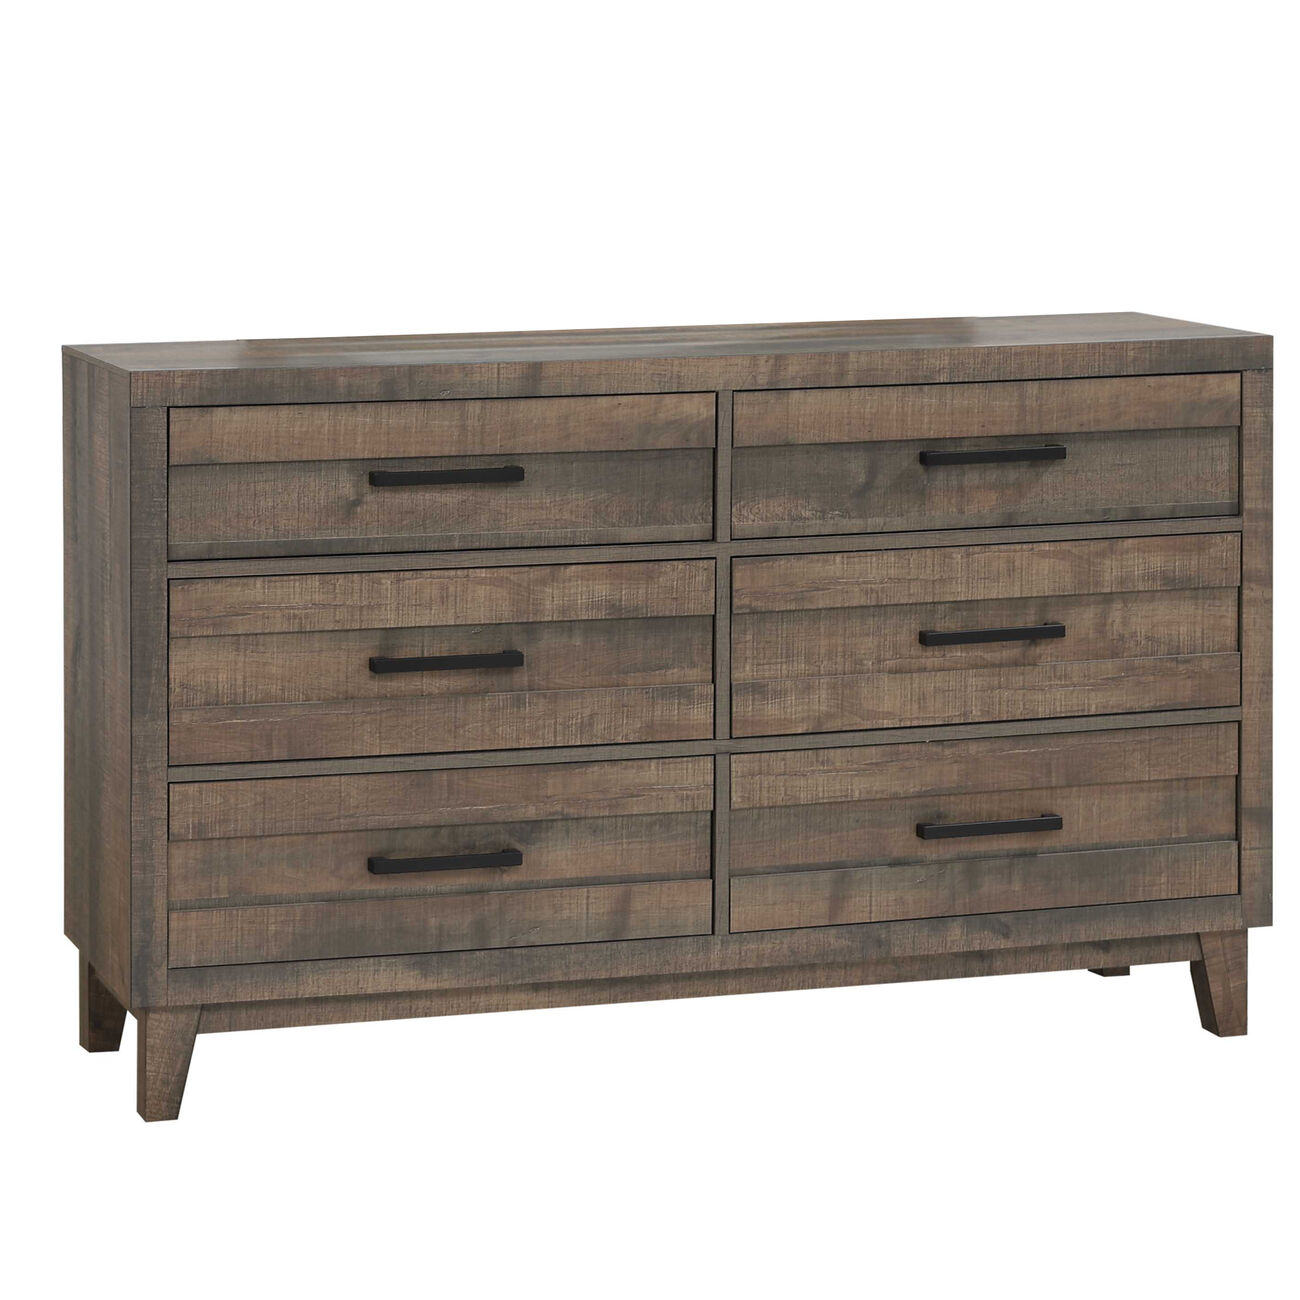 Transitional Style Plank Front Wooden Dresser with 6 Drawers, Brown